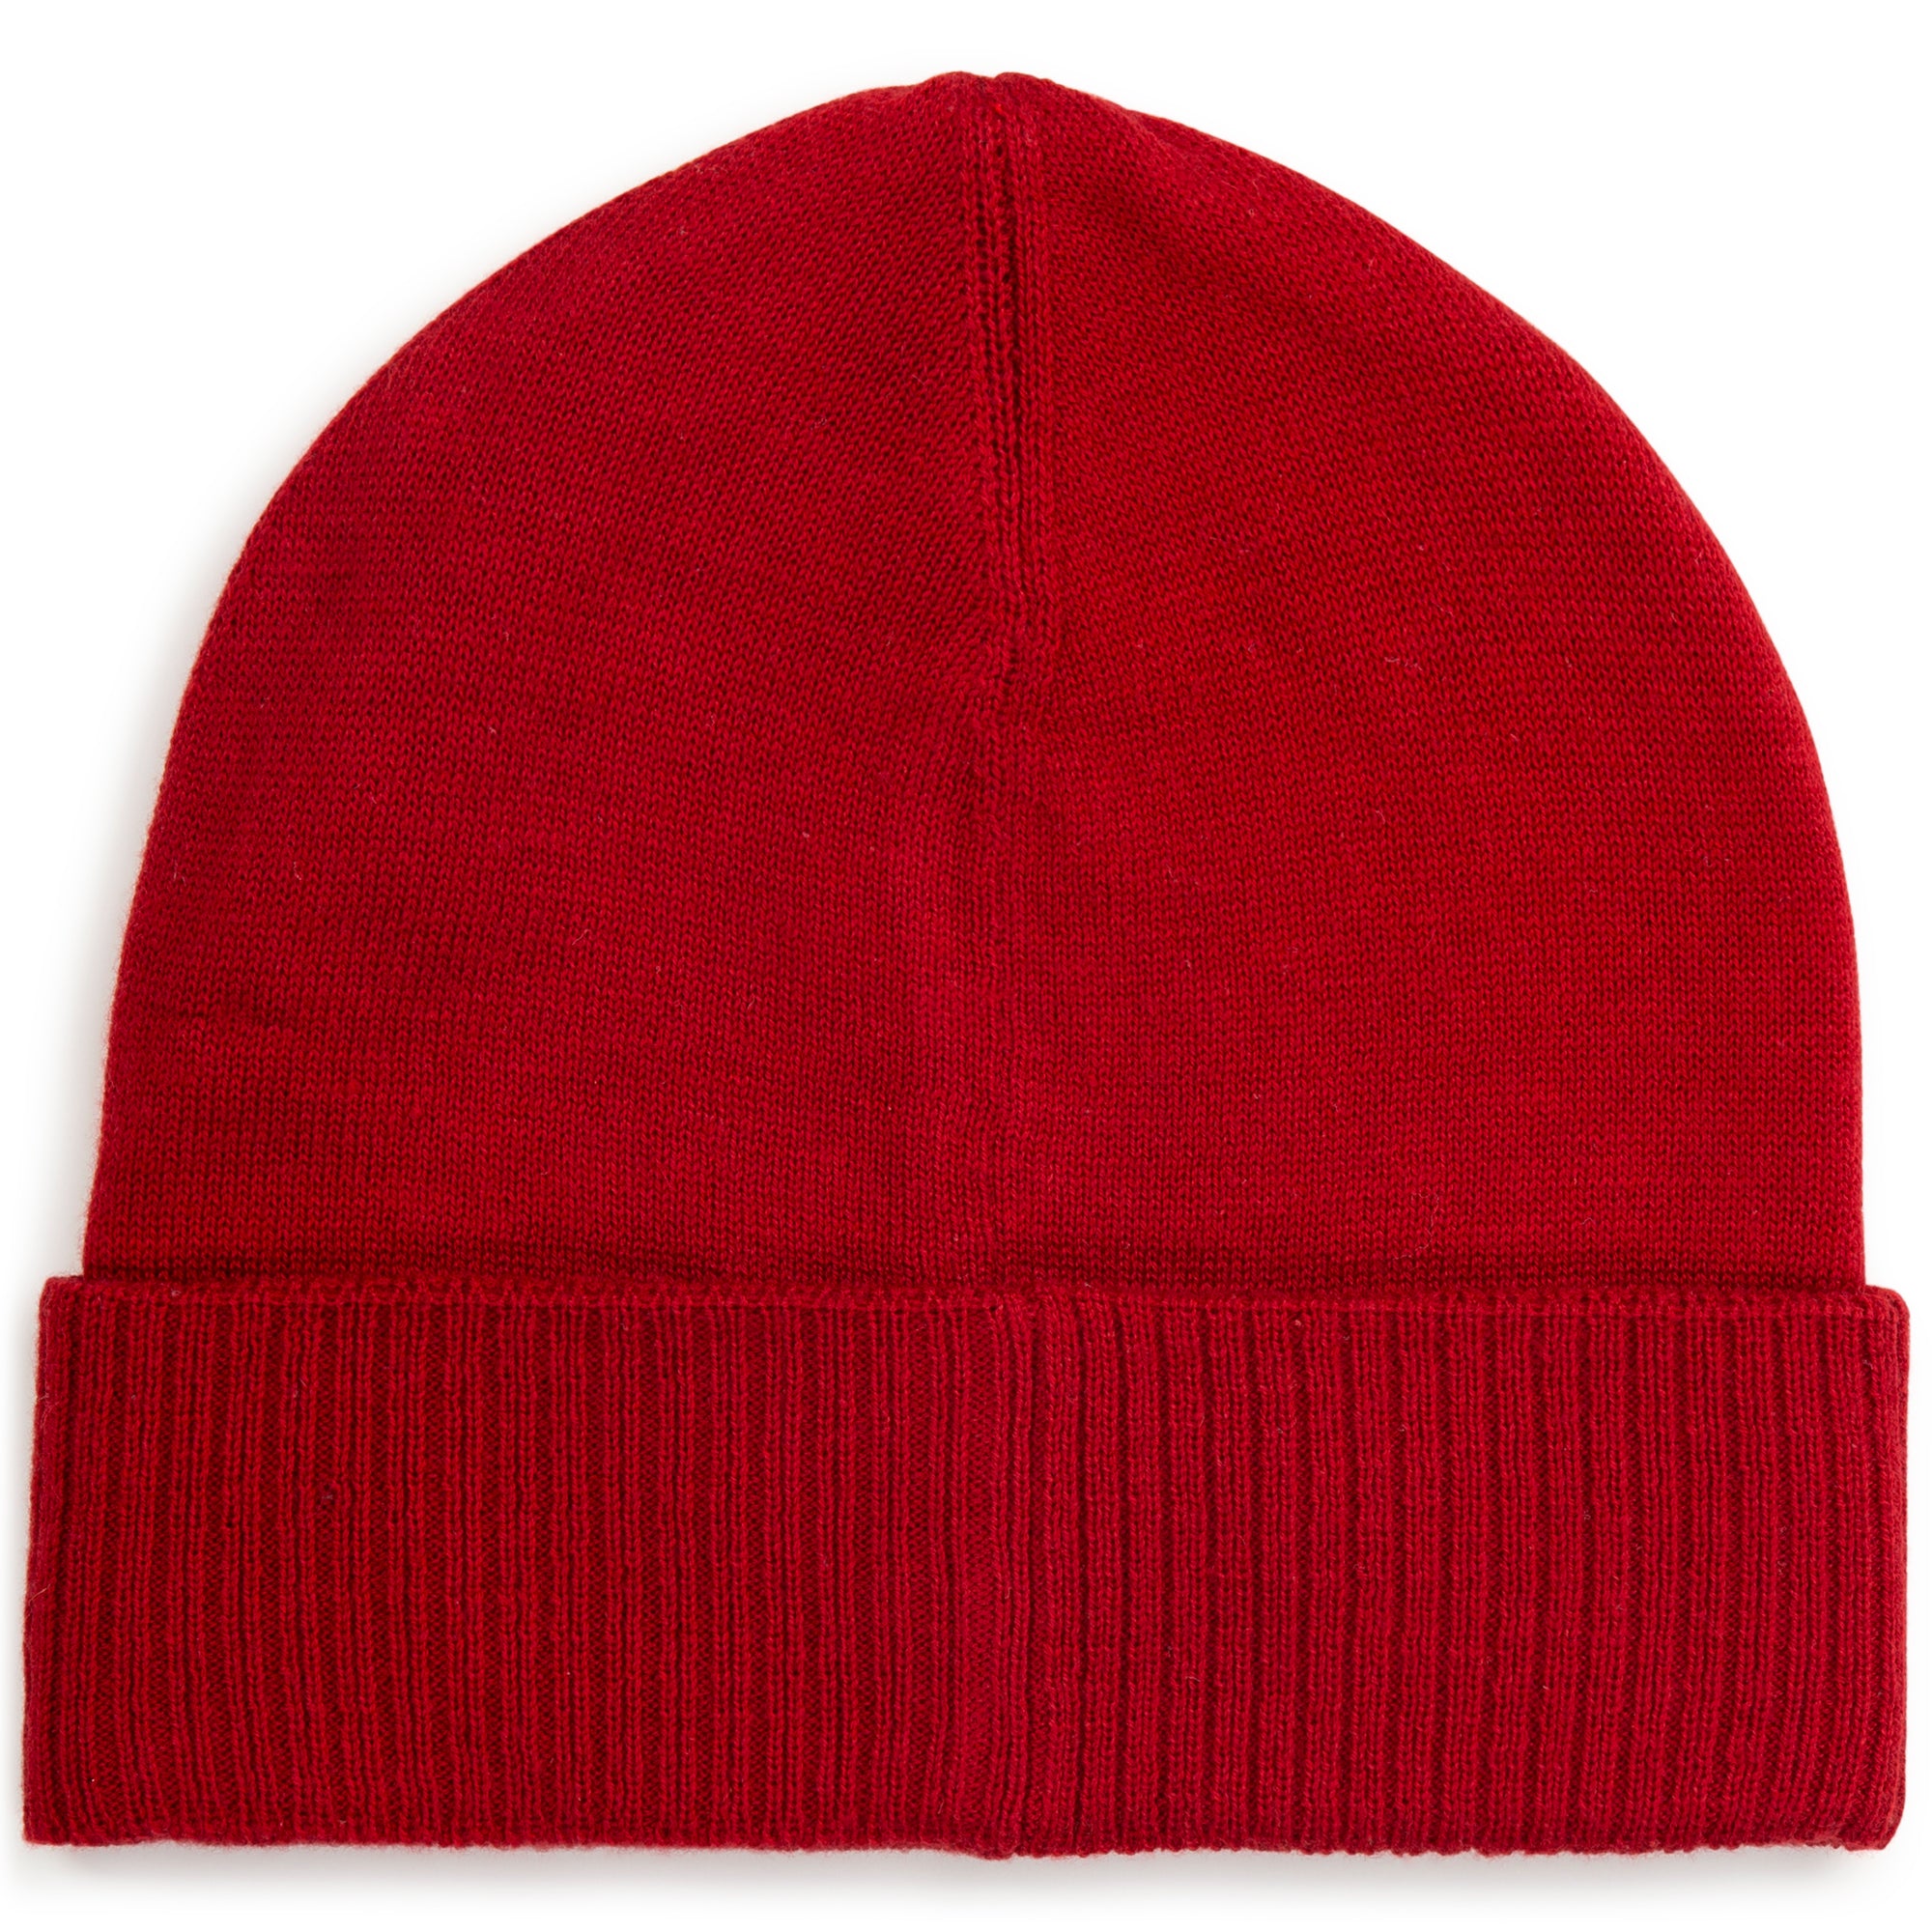 Boys Red Knit Hat